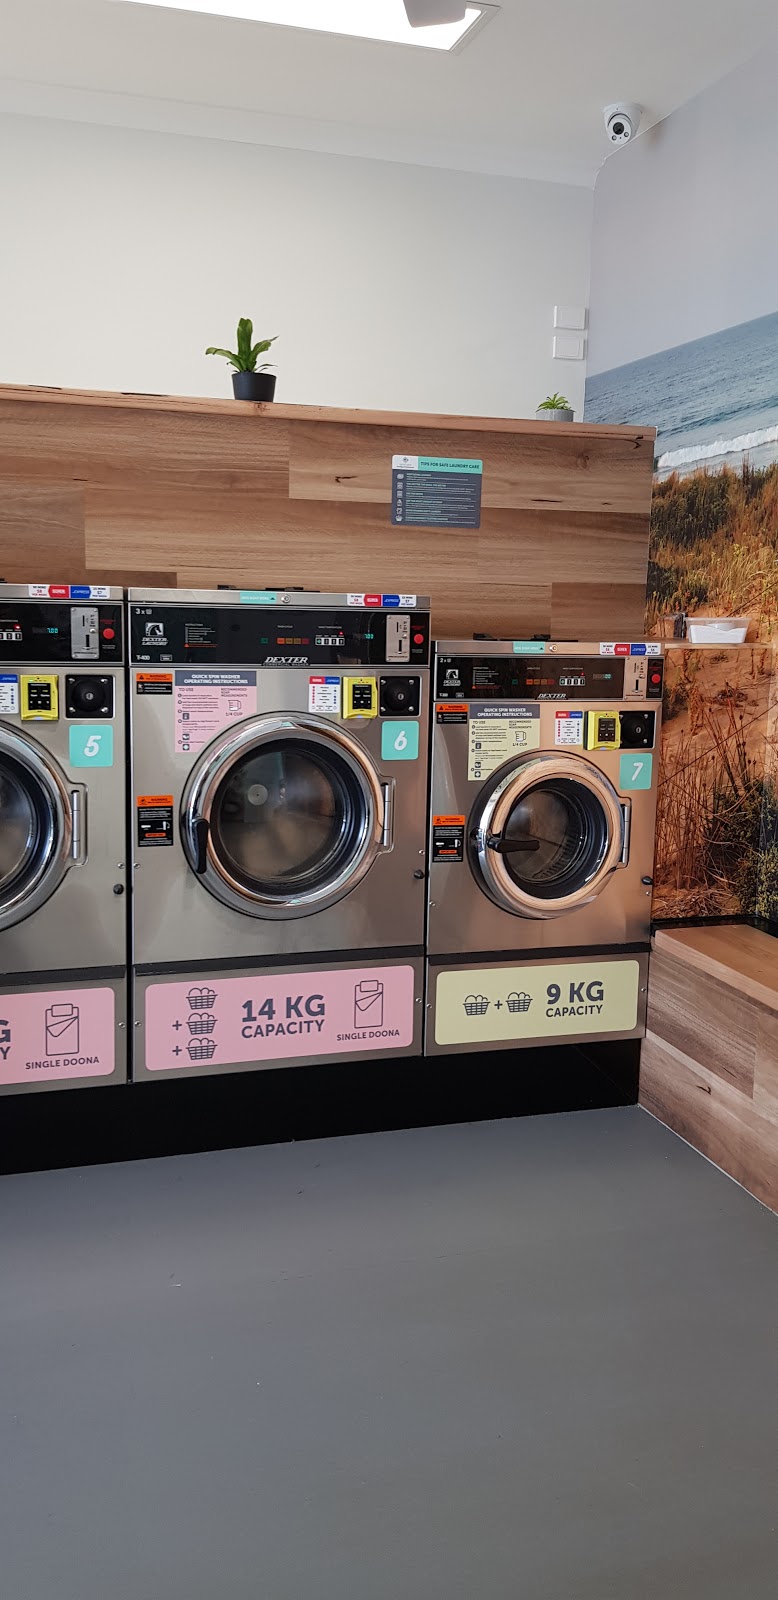 Quick spin Laundry and Doona wash | laundry | Shop 5, Northpoint Shopping Centre, 82 Mortlake Rd, Warrnambool VIC 3280, Australia | 0491190116 OR +61 491 190 116